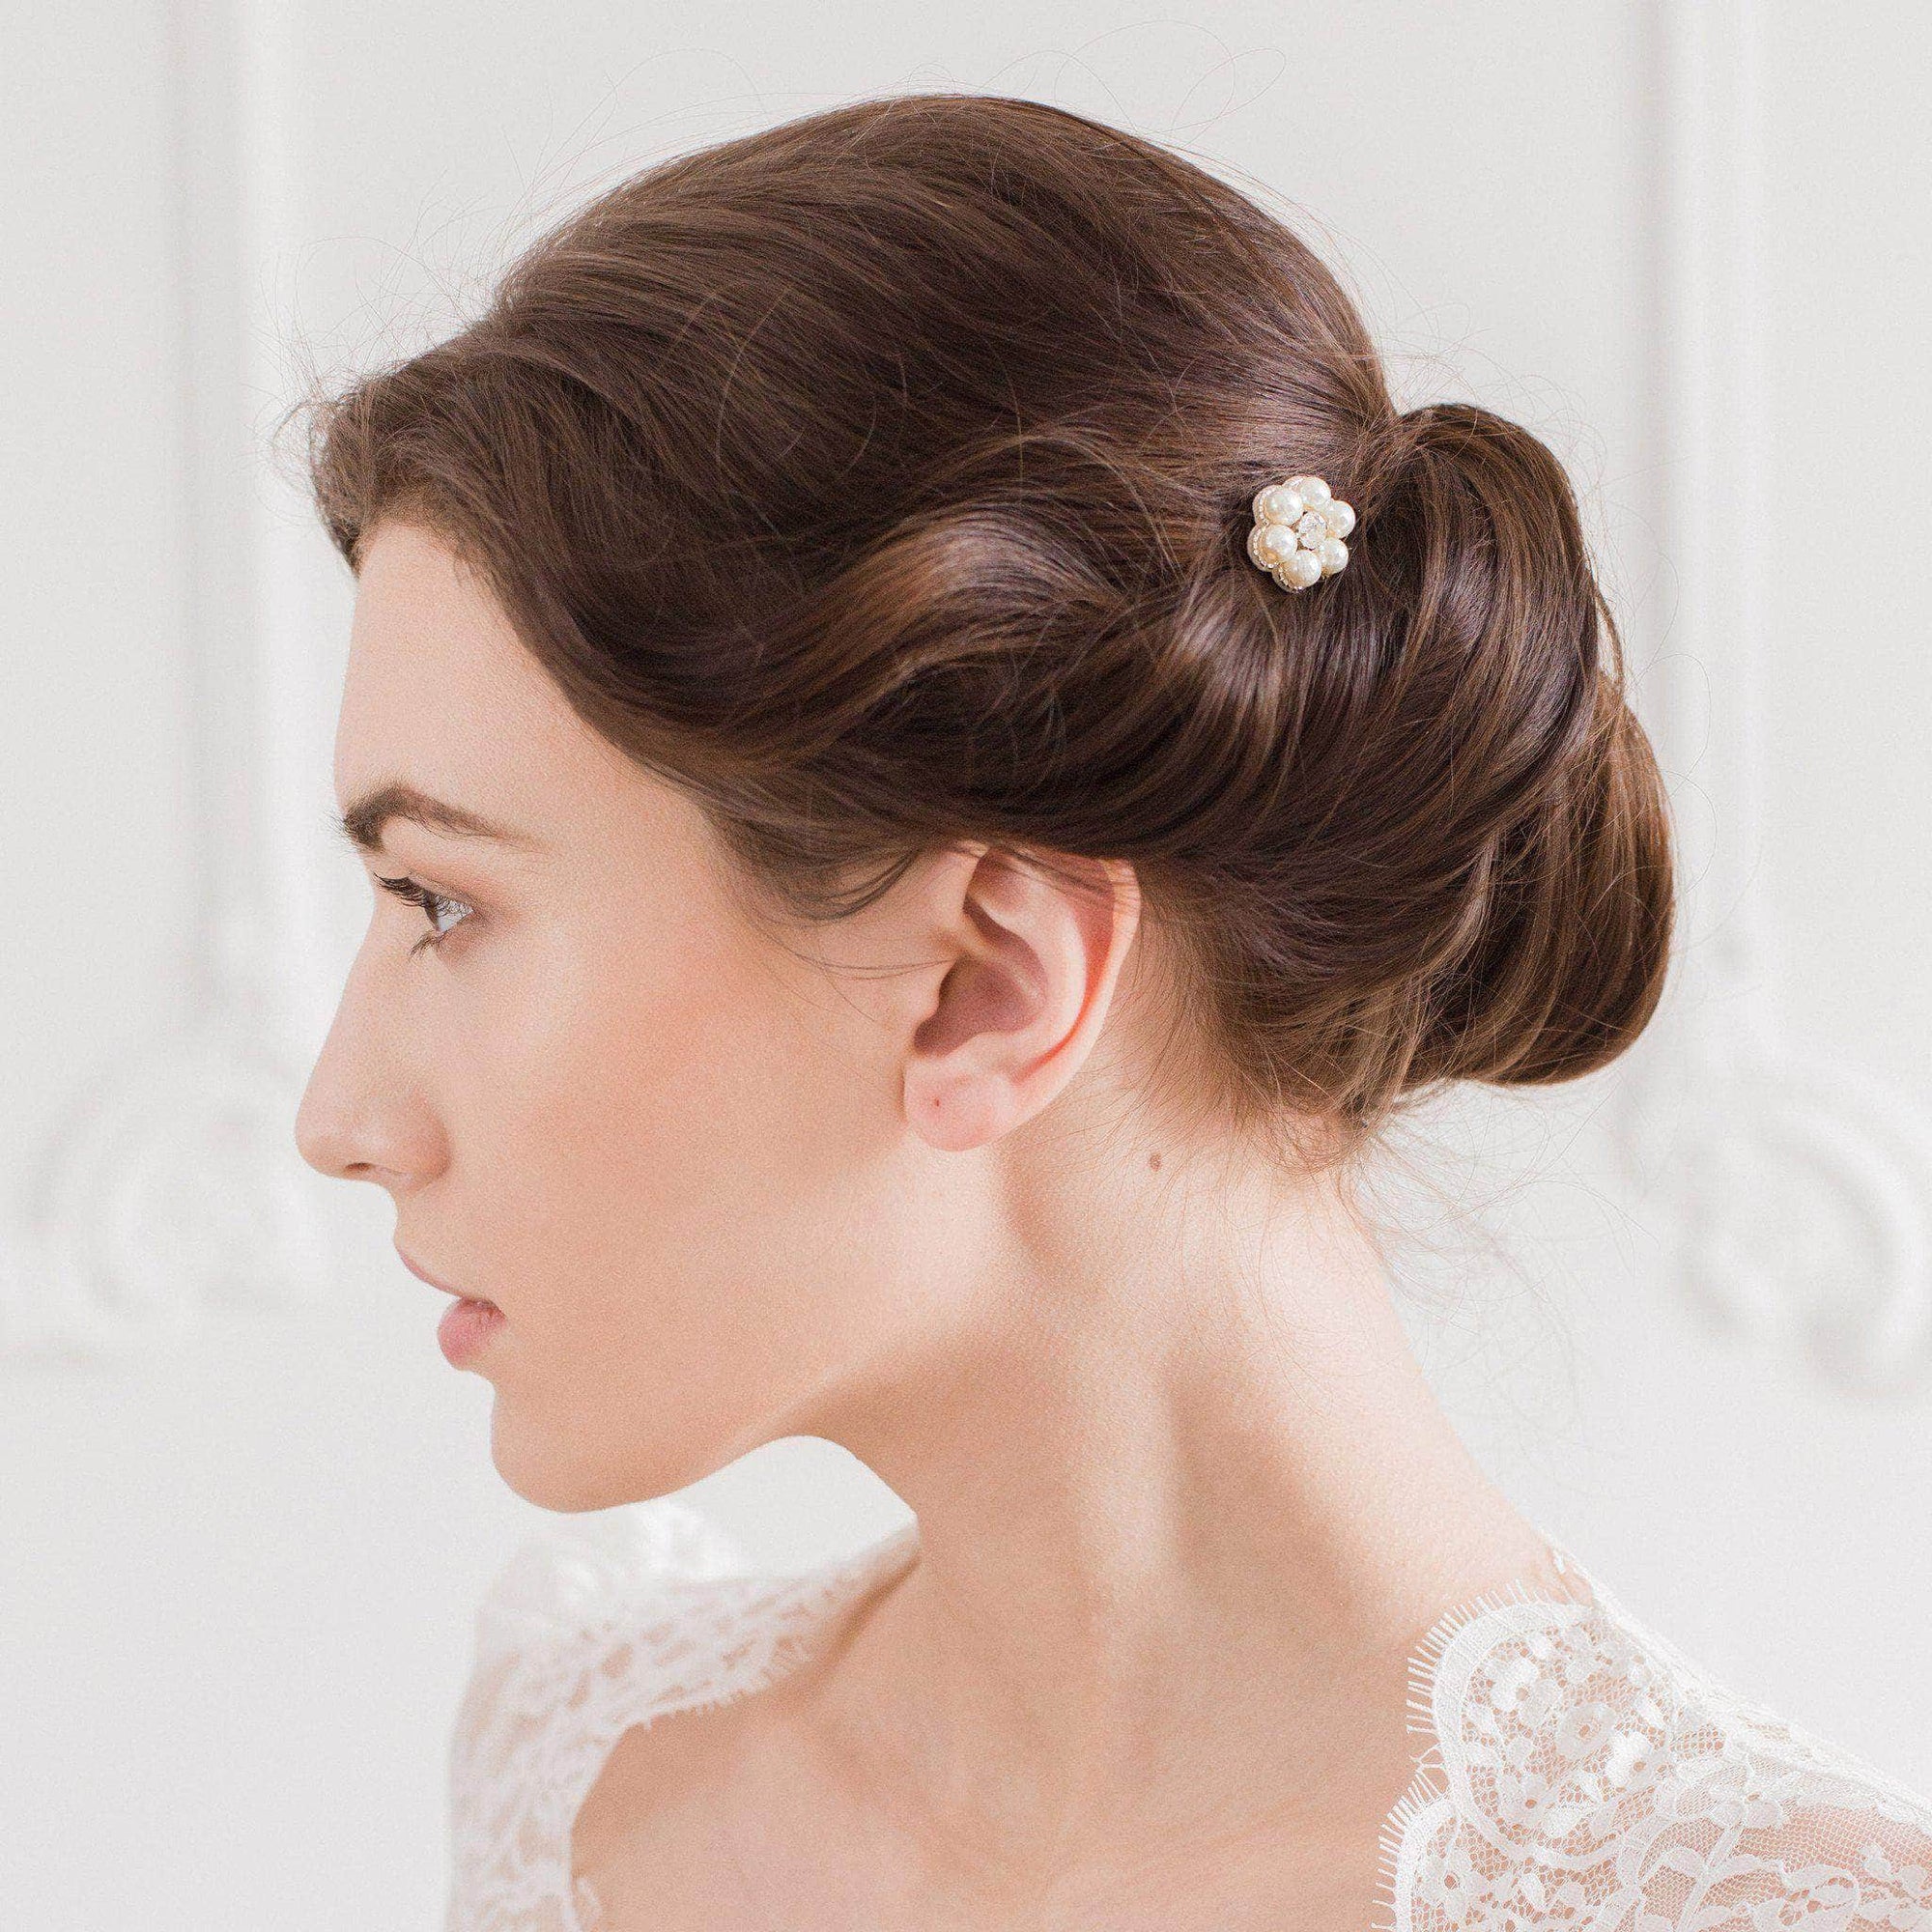 Wedding Hairpin Flower wedding hair pins in crystal and pearl (x3) - 'Lucie'